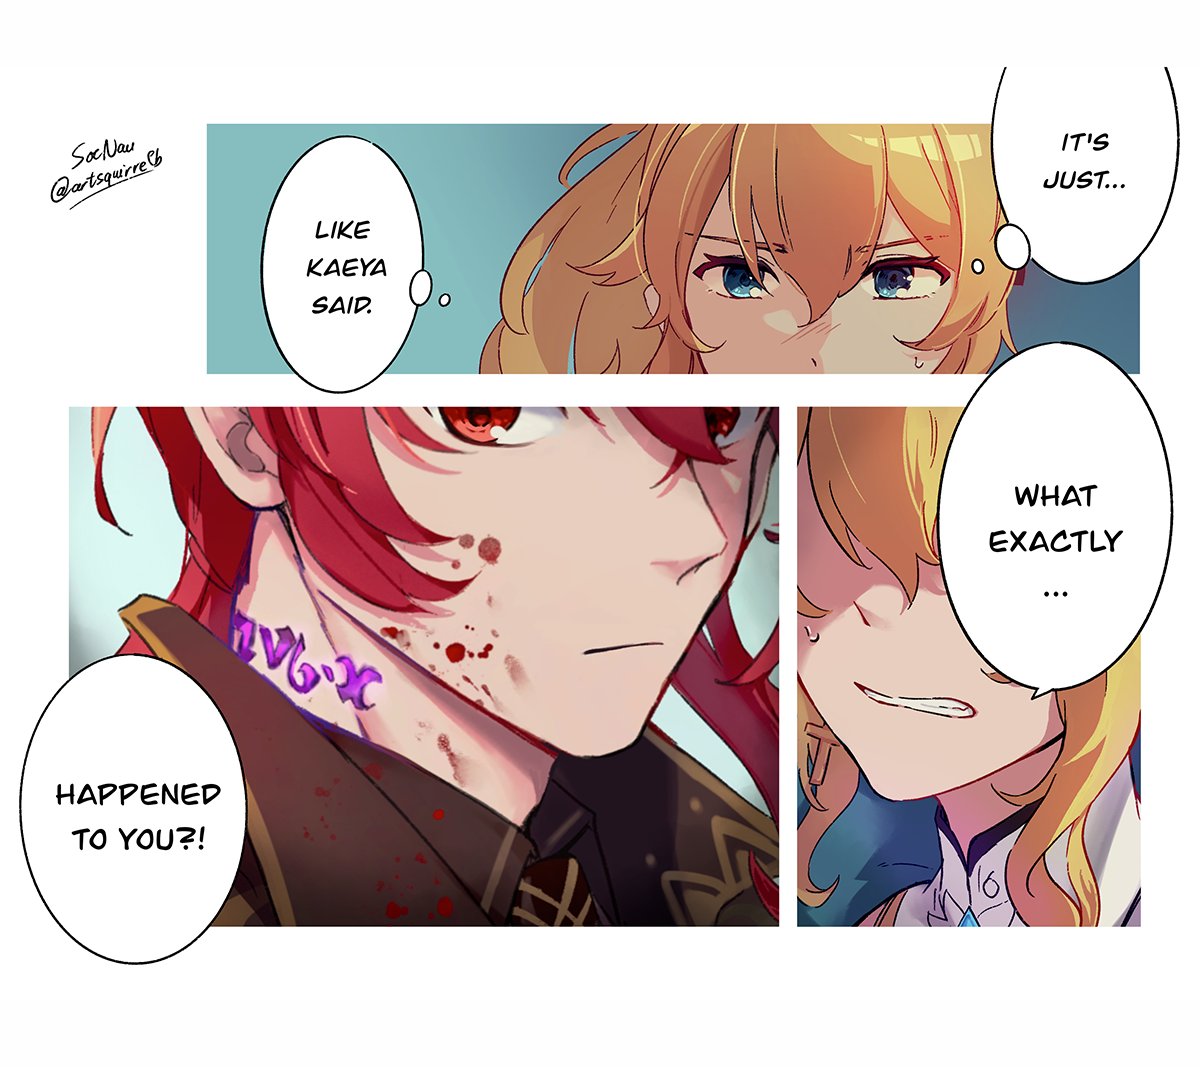 Corrupted/Fallen Diluc AU
#原神  #GenshinImpact #Jealuc #ディルジン 
(Read from right to left) 